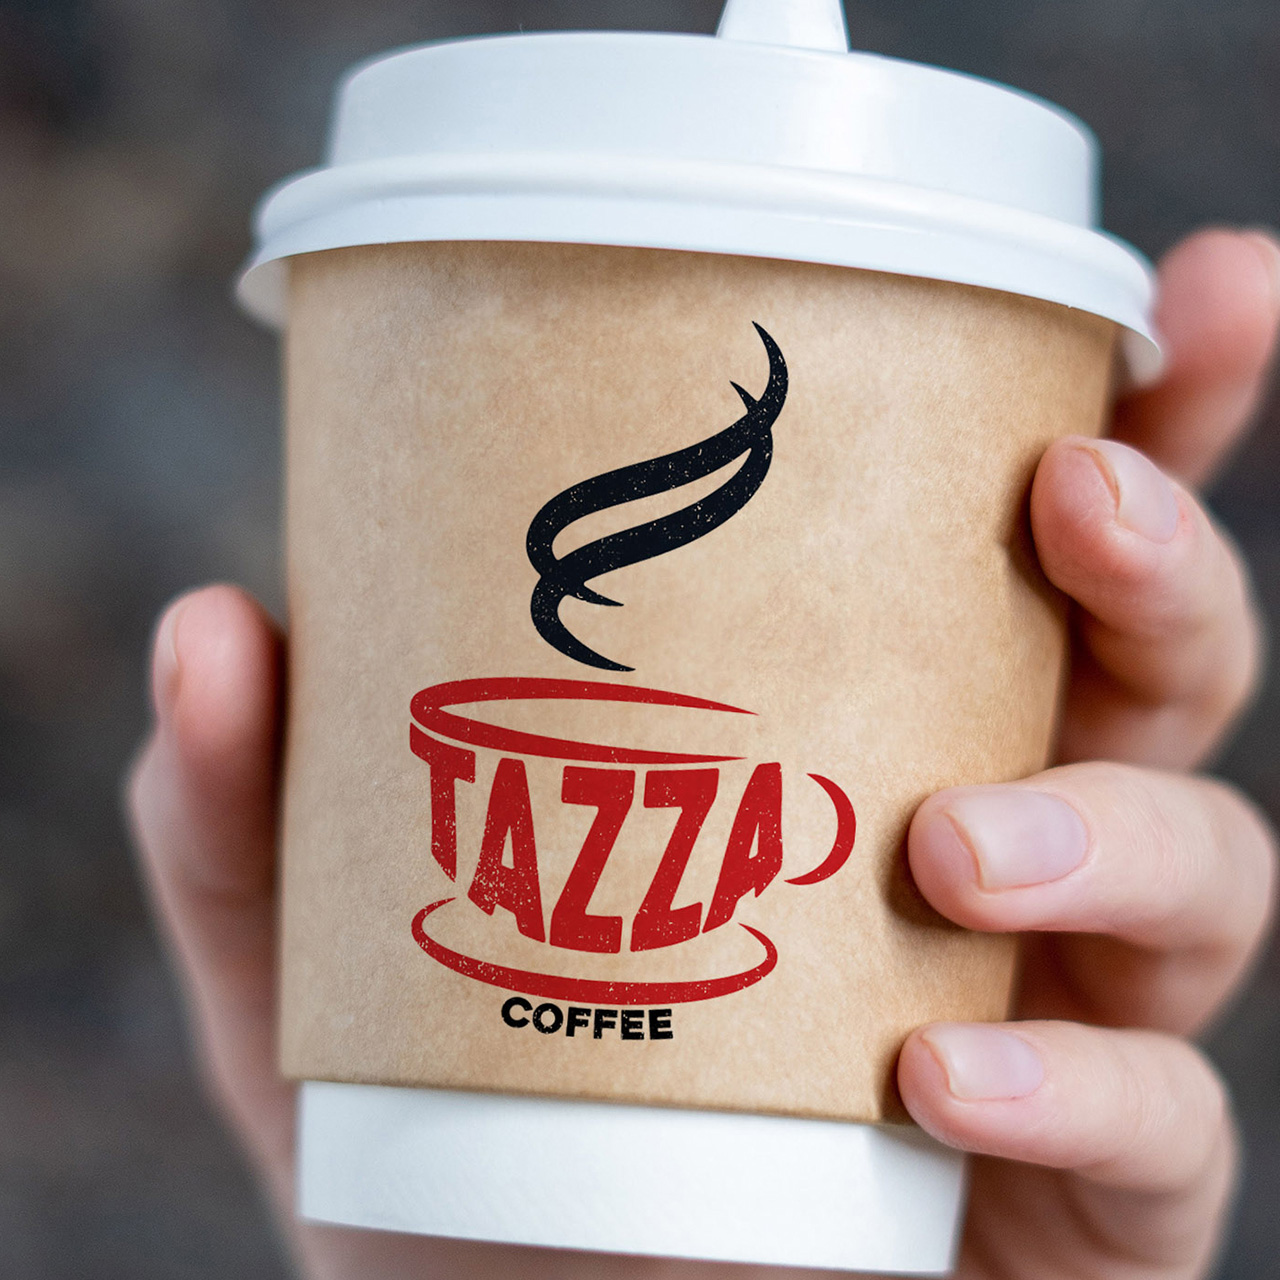 A hand holds a Tazza coffee cup